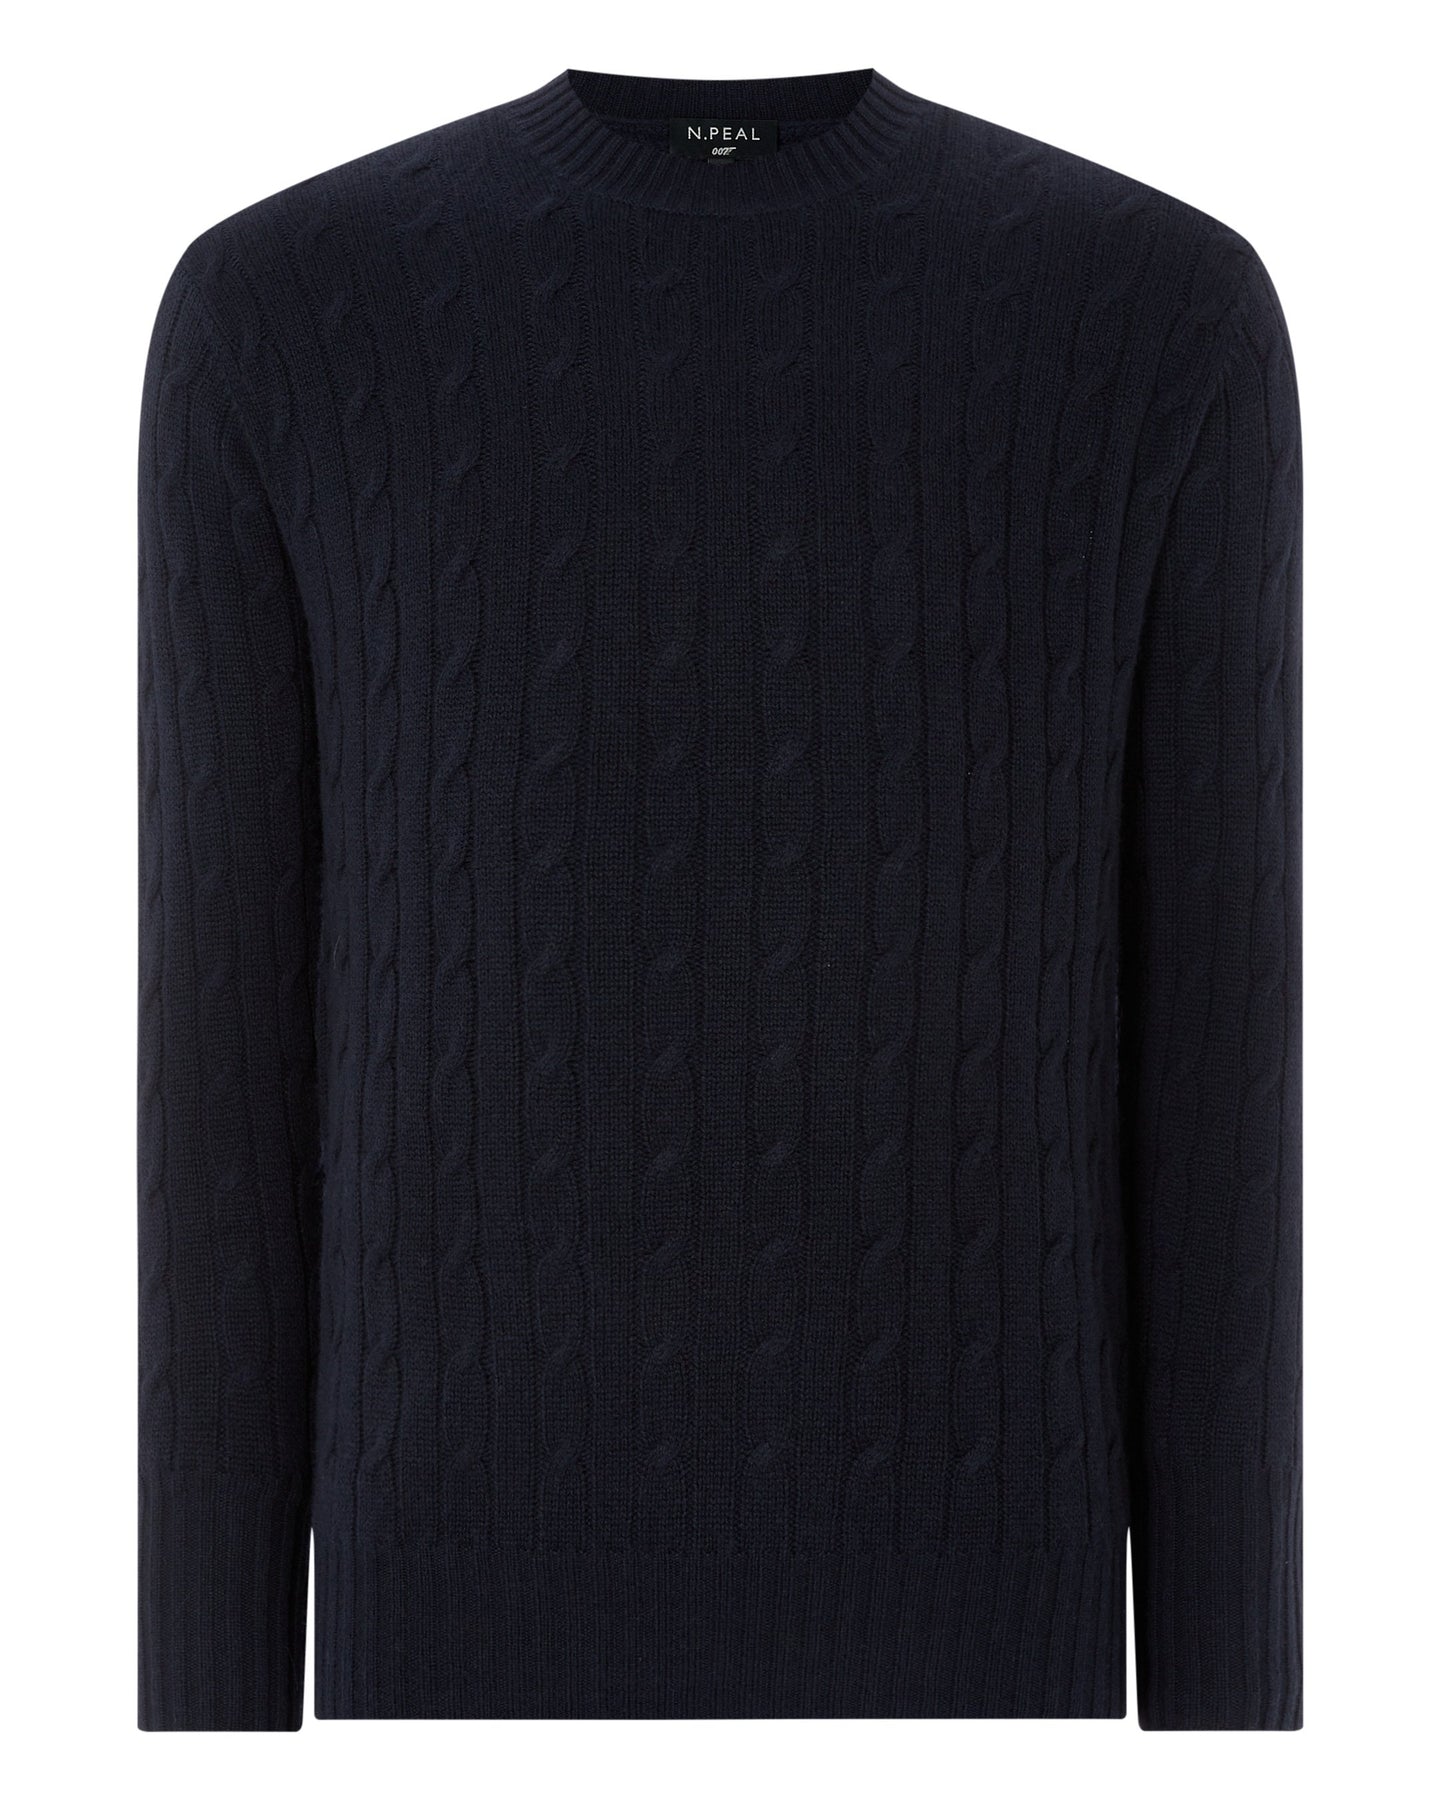 N.Peal 007 Cable Crew Neck Sweater Navy Blue